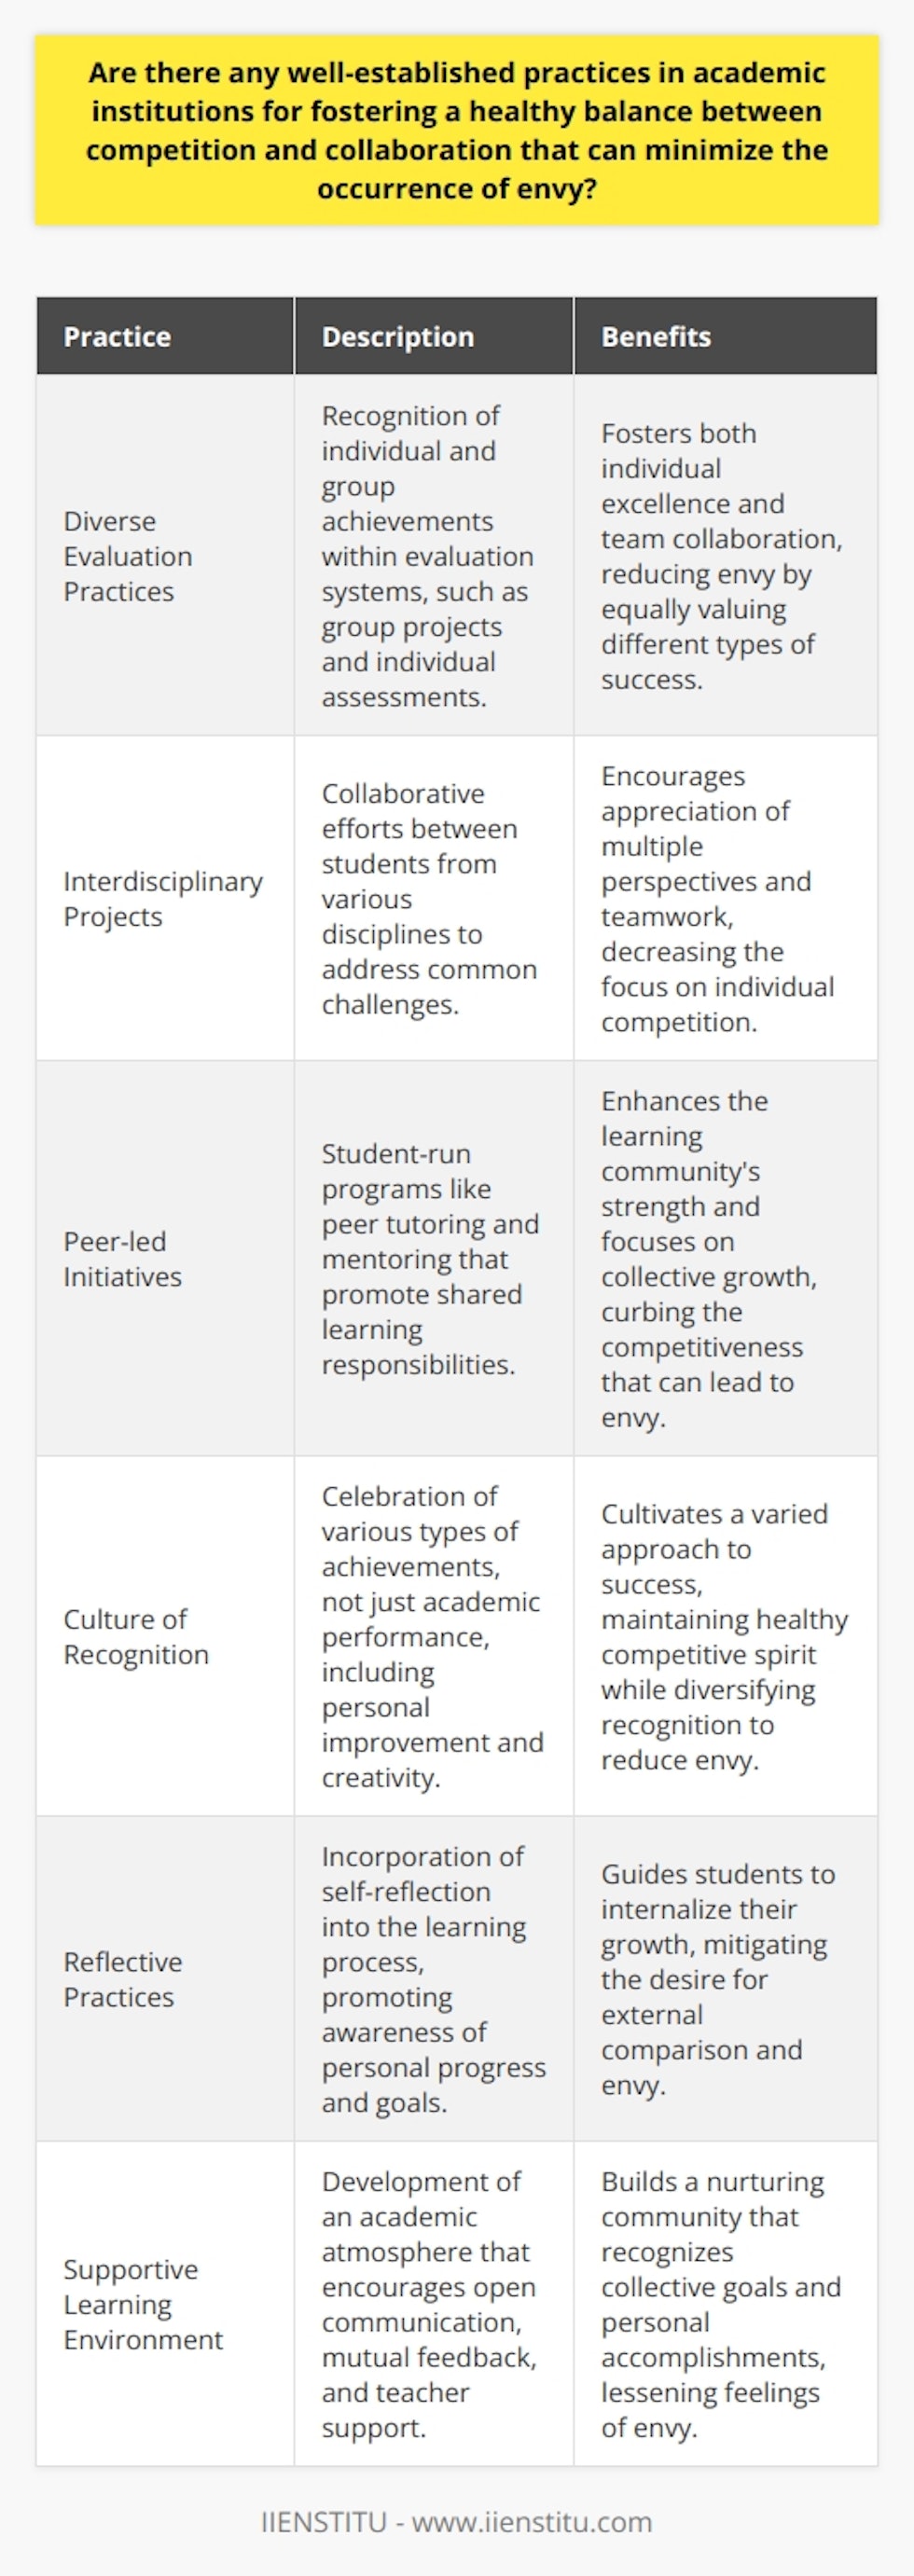 The academic environment often walks a fine line between fostering competition and encouraging collaboration. Striking the right balance is crucial, as excessive competition can lead to envy and undermine the learning process, while overemphasizing collaboration may disincentivize personal excellence. Various practices to maintain this equilibrium have emerged, proving to be beneficial in educational settings.Diverse Evaluation PracticesInstitutions have implemented diverse evaluation practices that recognize the achievements of both individuals and groups. This system rewards personal accomplishments while also acknowledging the significance of collective efforts. It maintains the competitive spirit by promoting individual excellence, yet it also elevates teamwork through group projects and assignments. By doing so, it addresses the individual’s need for recognition and the group’s successes equally, preventing envy from taking root.Interdisciplinary ProjectsInterdisciplinary projects have also been introduced, where students from different fields collaborate to solve common problems. These projects teach students the value of different perspectives and reduce the likelihood of envy, as contributions are recognized as part of a larger, cooperative effort rather than a zero-sum game.Peer-led InitiativesPeer-led programs also contribute to a balance between competition and collaboration. By engaging students in roles such as peer tutors or mentors, they develop a shared responsibility for each other's learning. This structure encourages experienced students to help others without fostering envy because the success of one is linked to the support provided to another.Culture of RecognitionDeveloping a culture that celebrates various forms of success is another effective method. This may involve highlighting achievements beyond grades, such as resilience, improvement, or creativity. By diversifying the criteria for recognition, academic institutions can ensure that competition remains healthy and envy does not overshadow accomplishments.Reflective PracticesIntegrating reflective practices into the curriculum is another measure that can help to subdue envy. Encouraging students to reflect on their learning journey fosters an inward focus on personal growth rather than an outward comparison with peers. This reflective attention can empower students to appreciate their unique progress and contributions, reducing instances of envy.Supportive Learning EnvironmentCreating a supportive learning environment where open communication and feedback are encouraged may also lessen envy. When students feel supported and know that their concerns and achievements are acknowledged by teachers and peers alike, they are less likely to experience envy. Instead, they realize that they are part of a nurturing community with collective goals.These are not exhaustive practices but offer a substantial foundation for academic institutions seeking to promote a healthy balance between competition and collaboration. The underlying goal is to ensure that students emerge from the educational experience not only as achievers but as well-rounded individuals capable of both competing and cooperating effectively in their future endeavors.